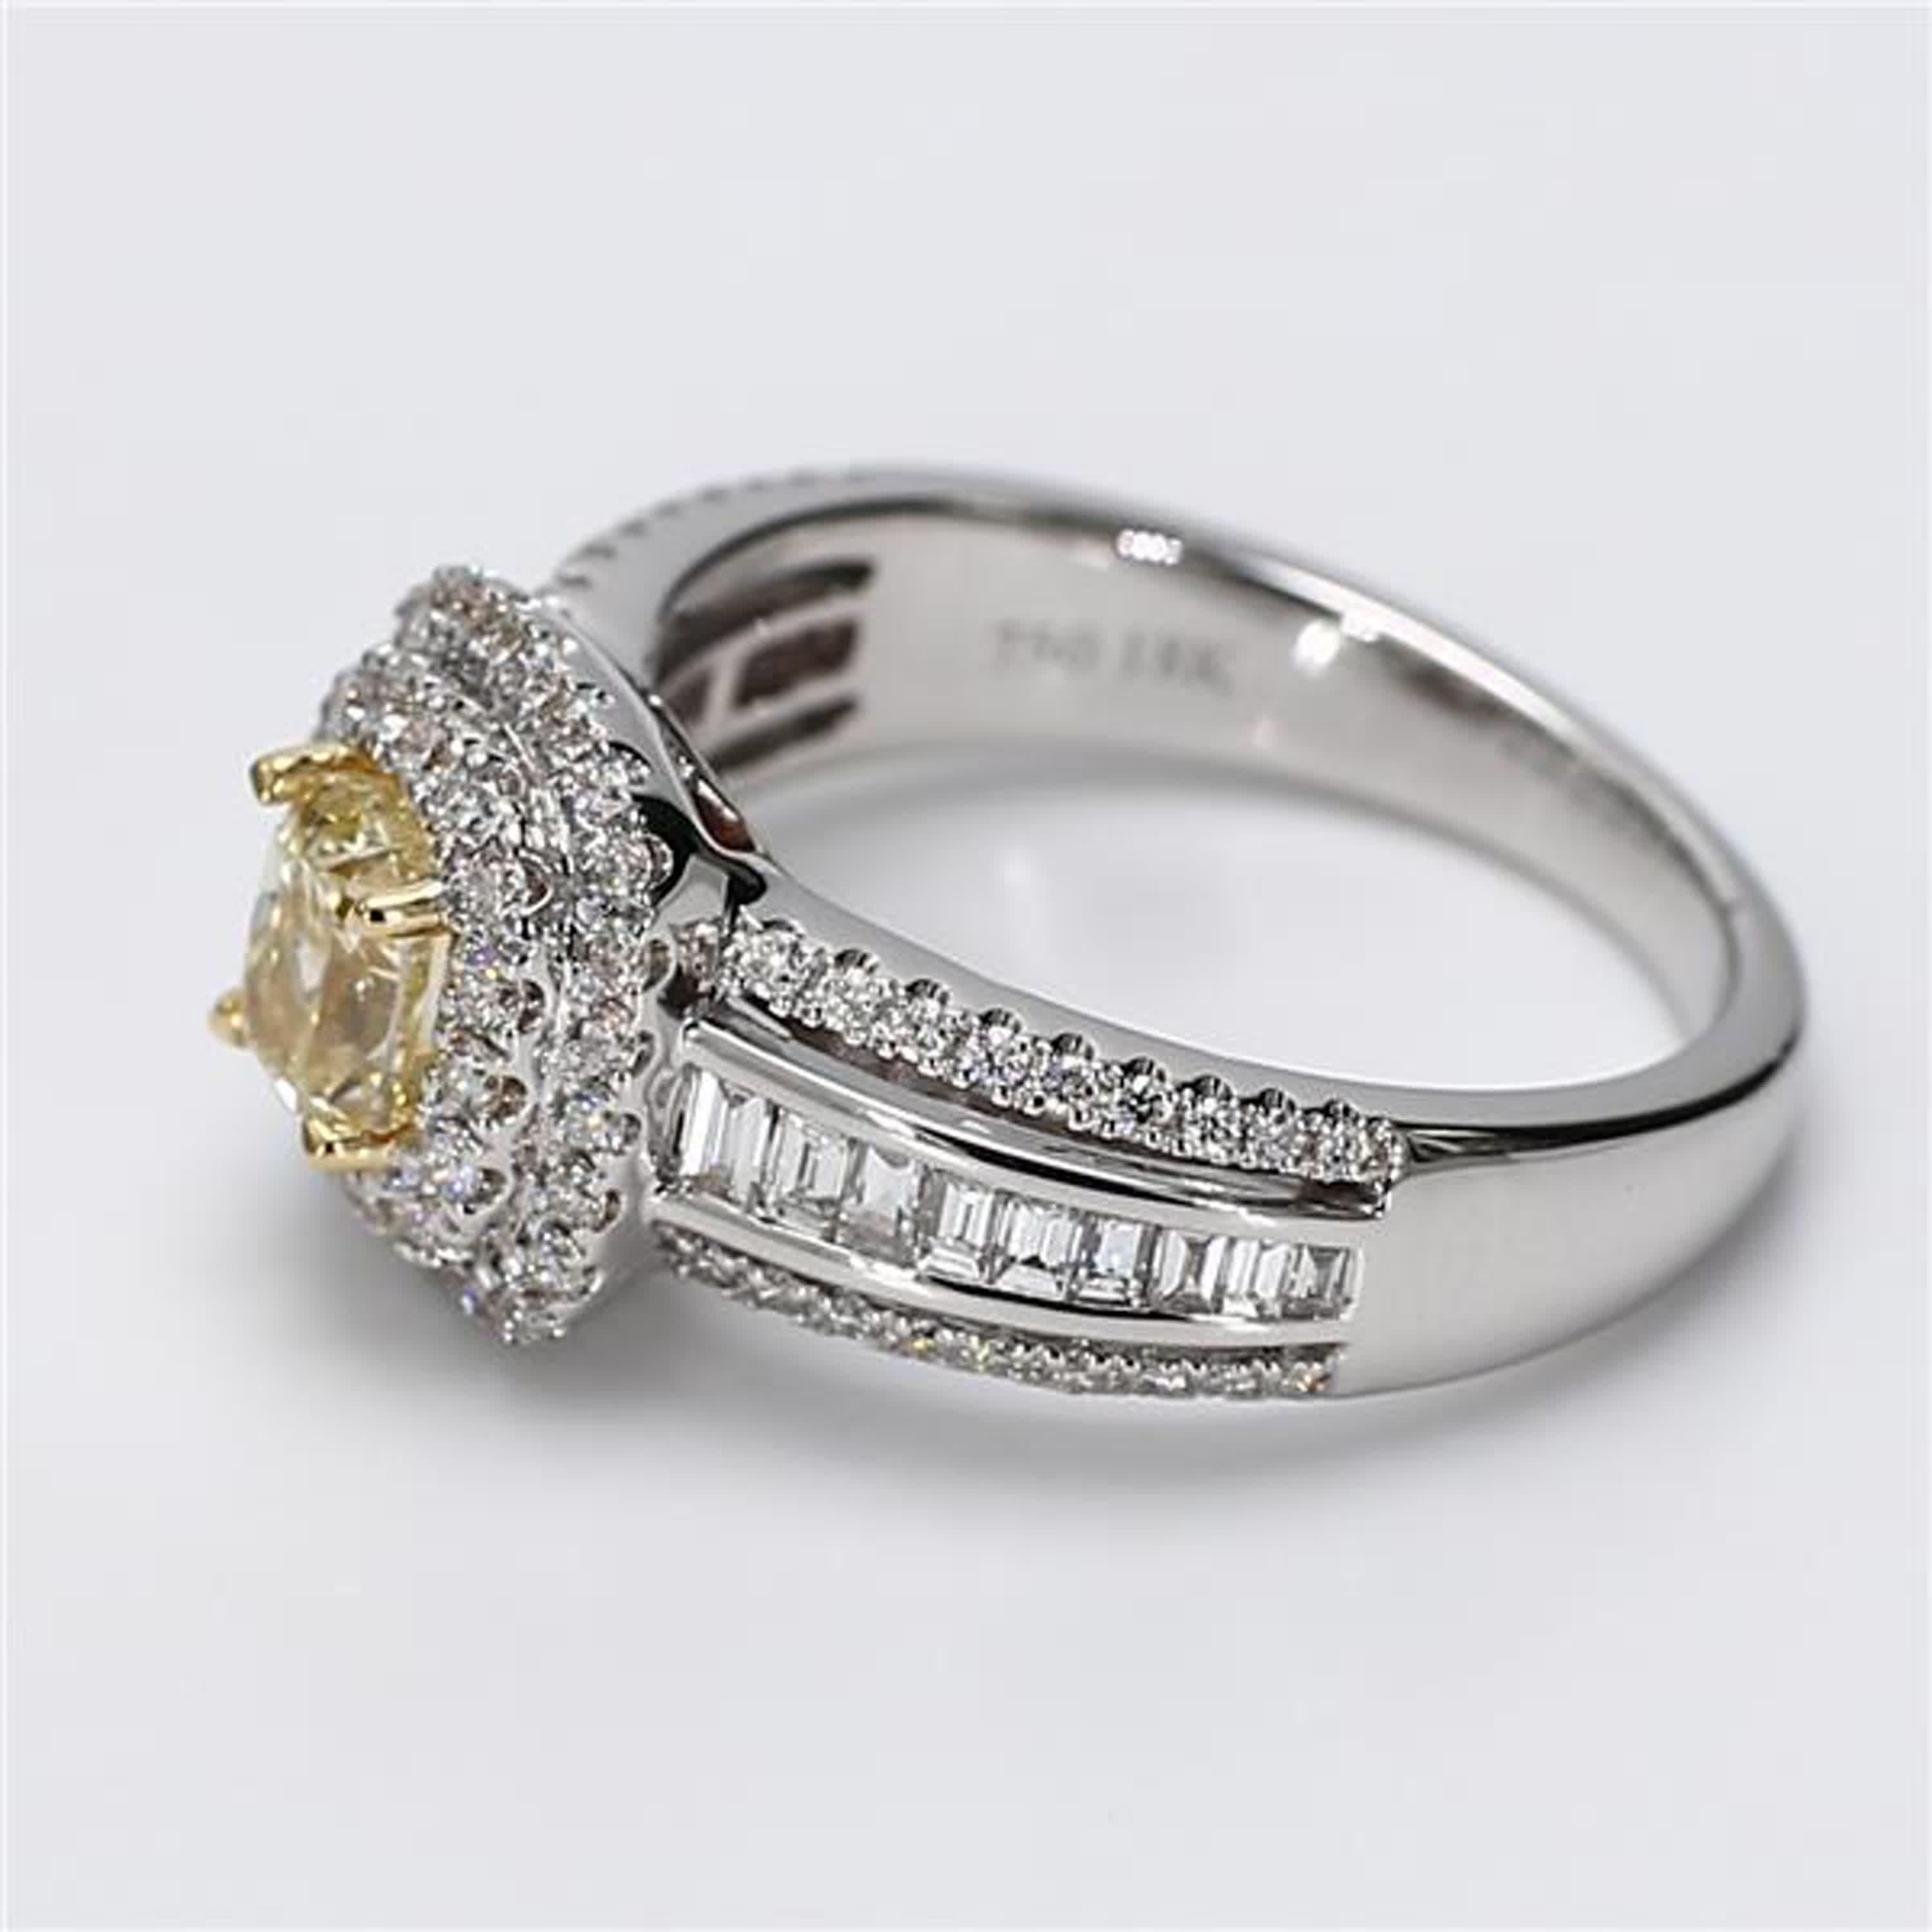 RareGemWorld's classic diamond ring. Mounted in a beautiful 18K Yellow and White Gold setting with a natural cushion cut yellow diamond. The yellow diamond is surrounded by natural baguette cut white diamonds, natural princess cut white diamonds,